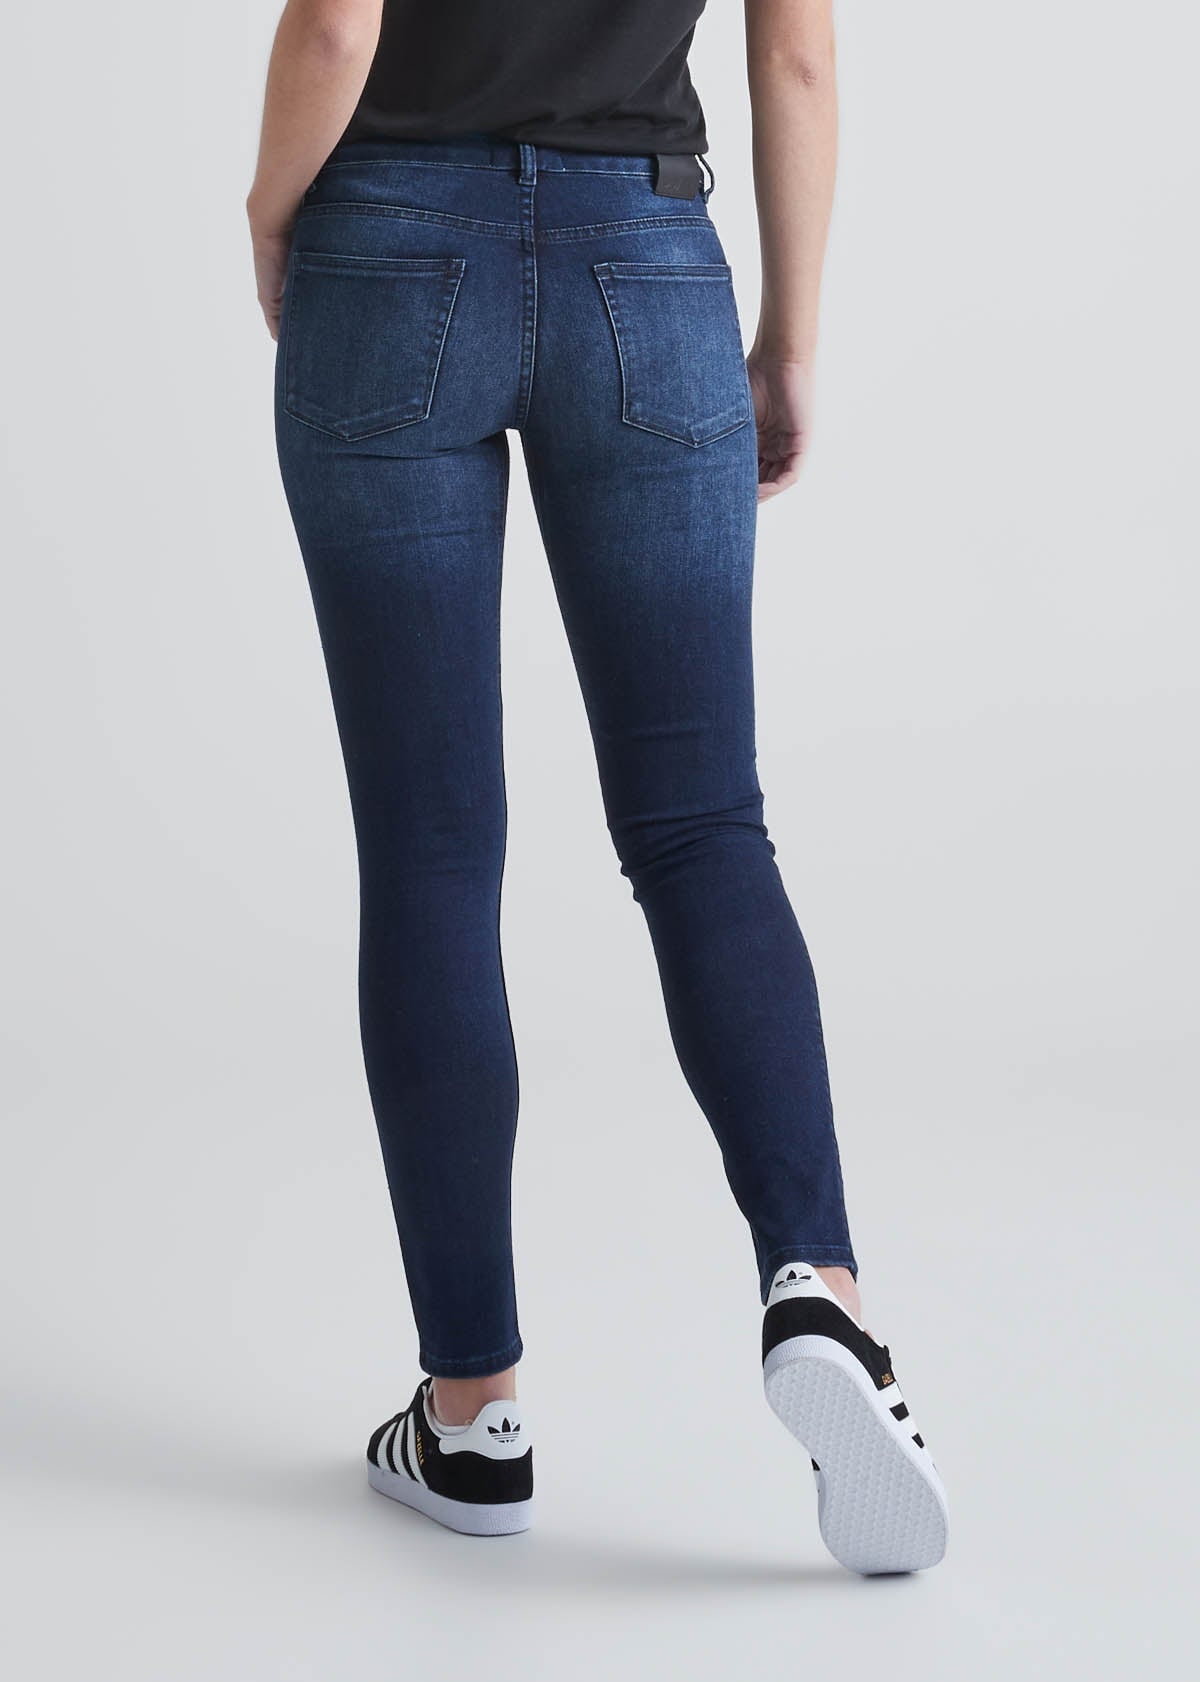 Mid-Rise Power Slim Straight Jeans | Old Navy